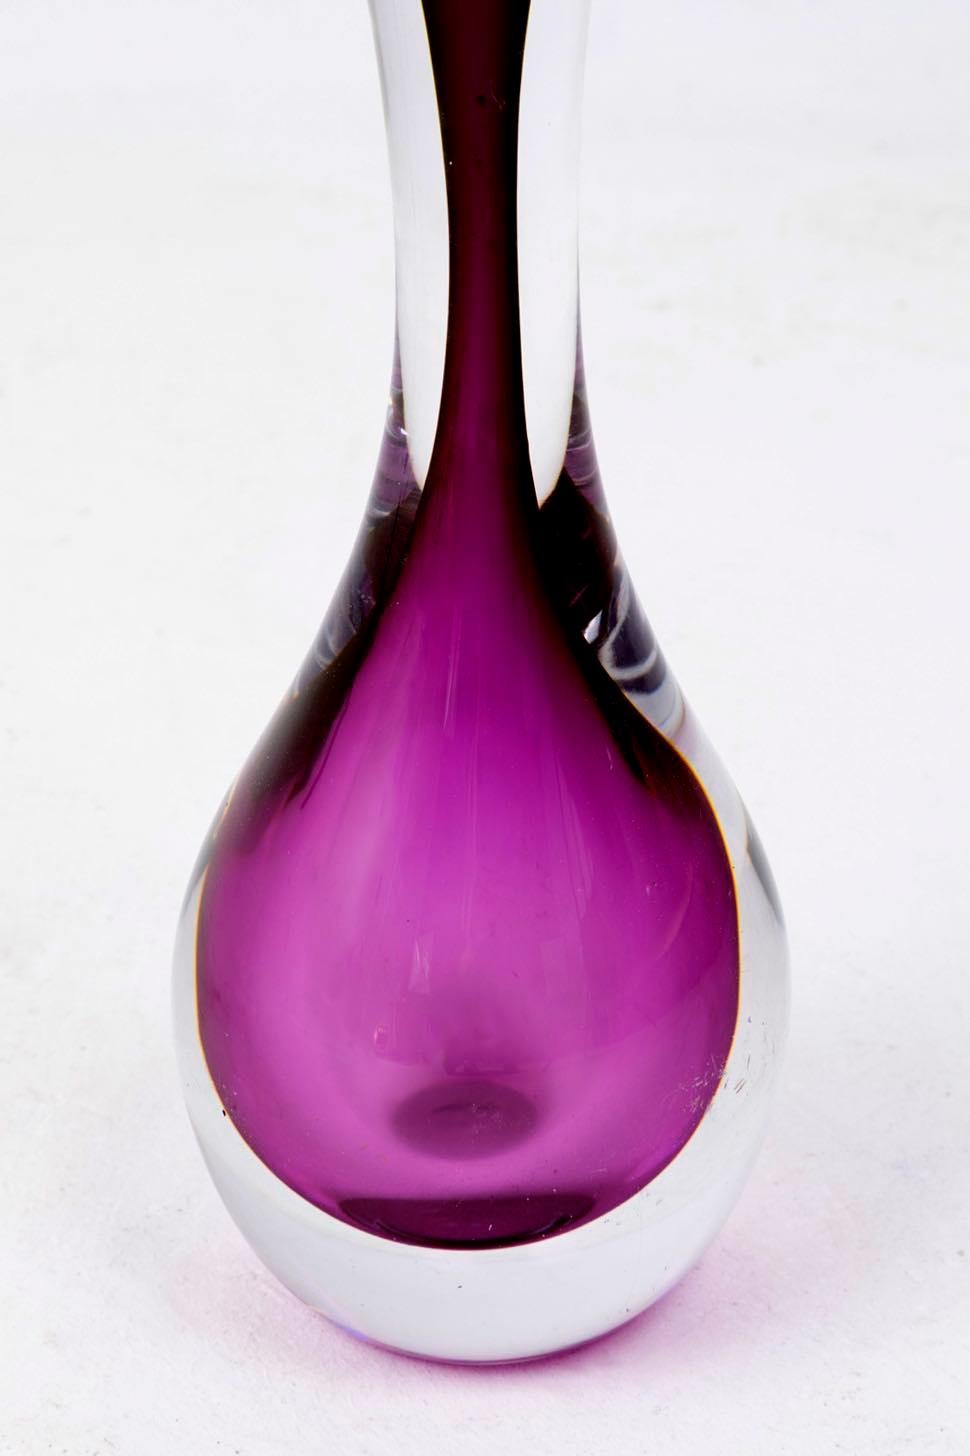 Molded Val-Saint-Lambert, Lamp in Transparent and Purple Moulded Crystal, 1960s For Sale